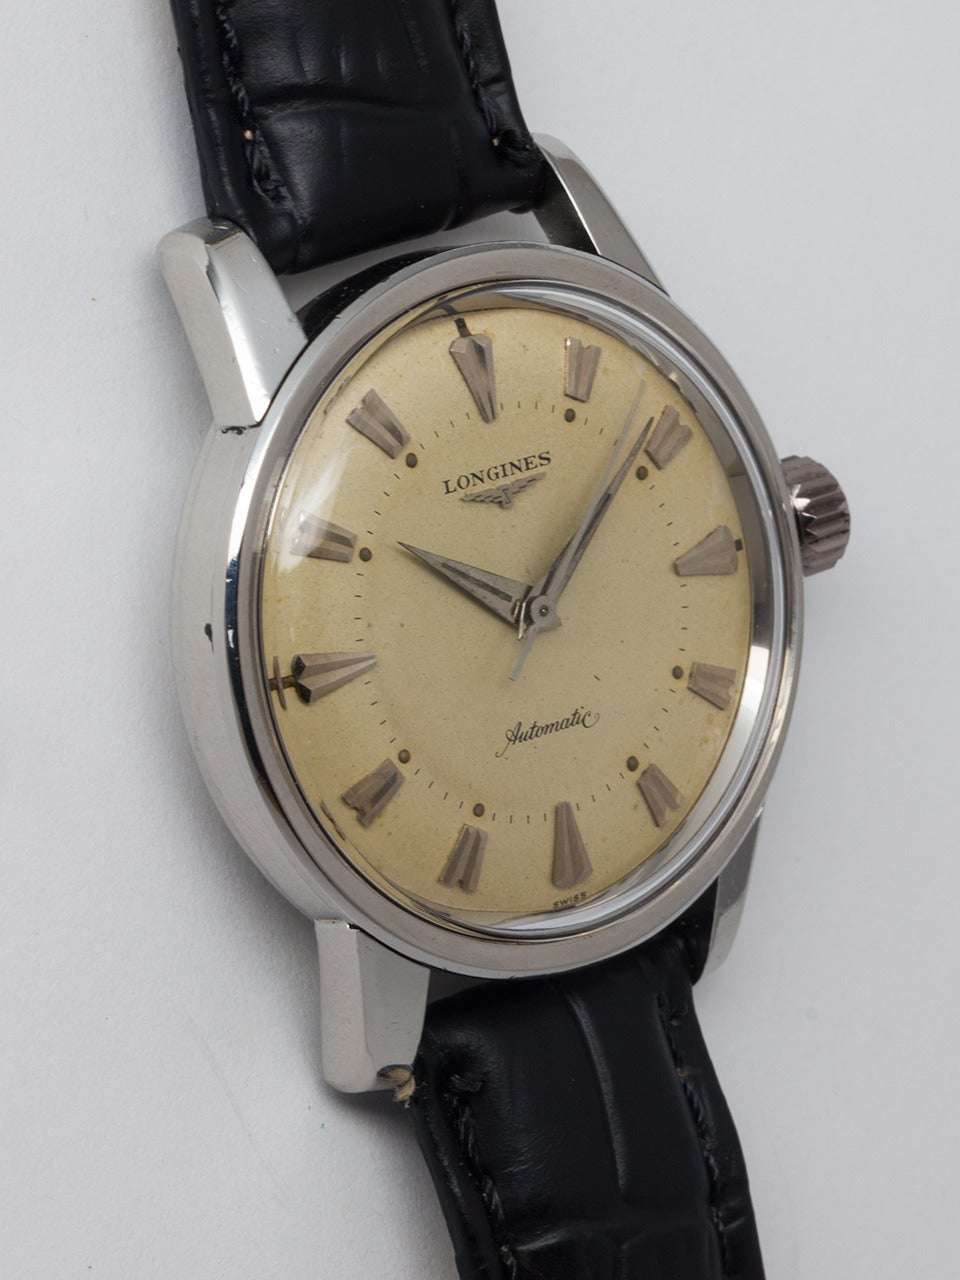 Longines Stainless Steel Automatic Wristwatch, circa 1950s. Large 35mm case with wide bezel, screw back, and heavy extended lugs. Very pleasing original warmly patinaed matte silvered dial with large fluted indexes, inner seconds track with luminous